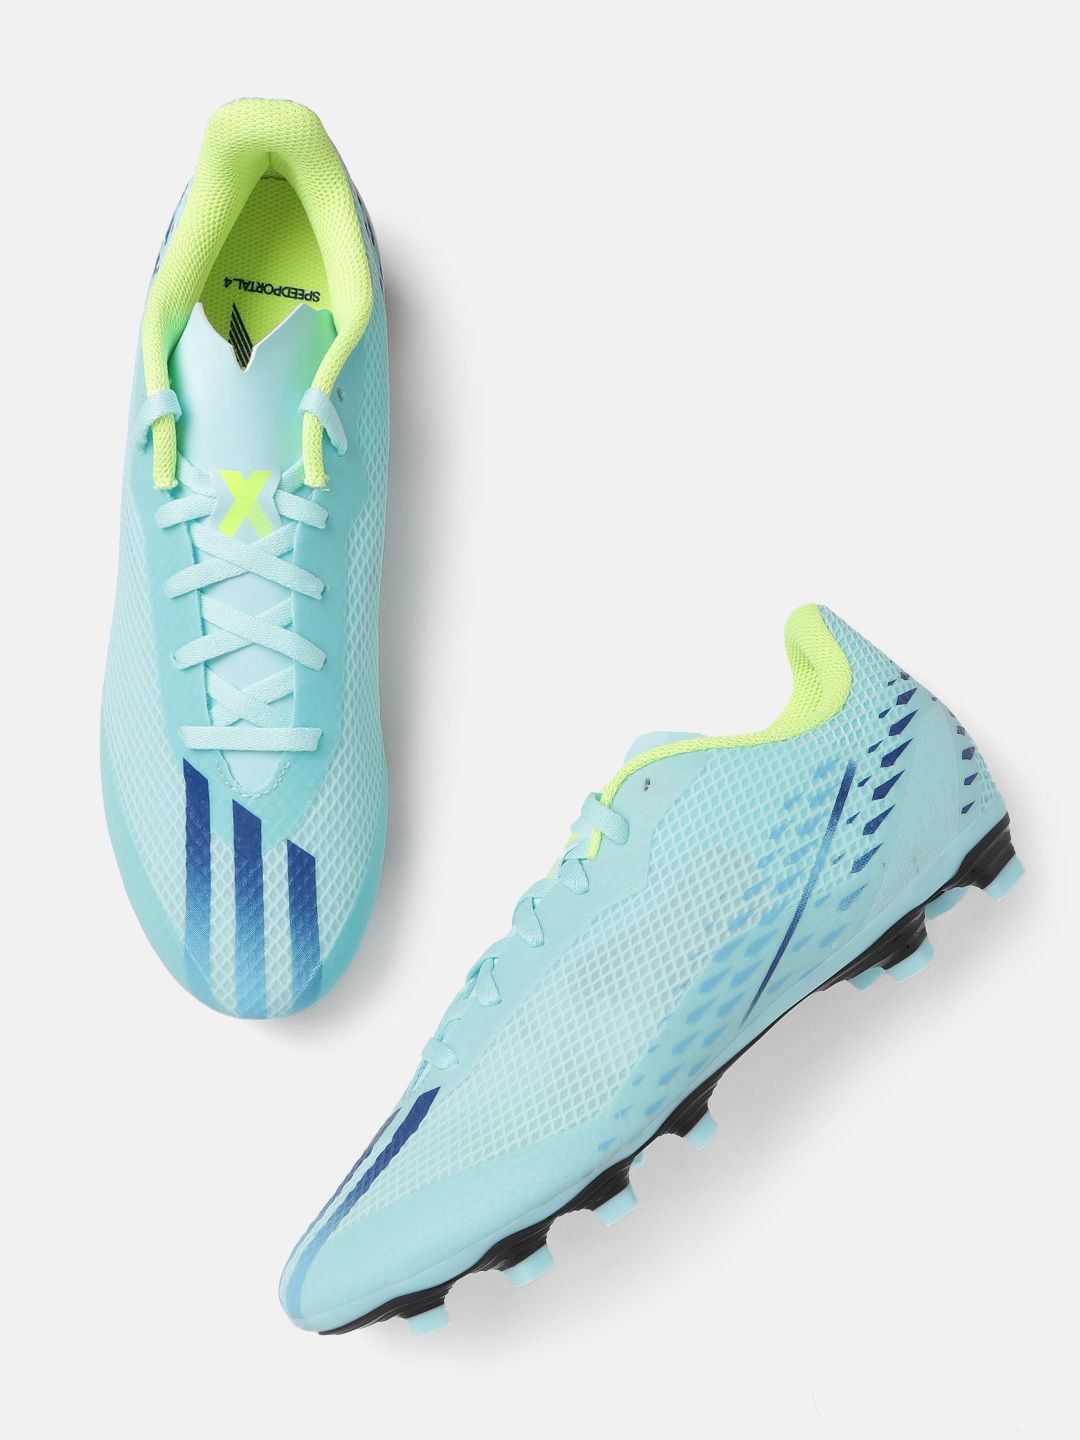 ADIDAS Unisex Blue Textured Synthetic X Speedportal.4 Football Shoes Price in India